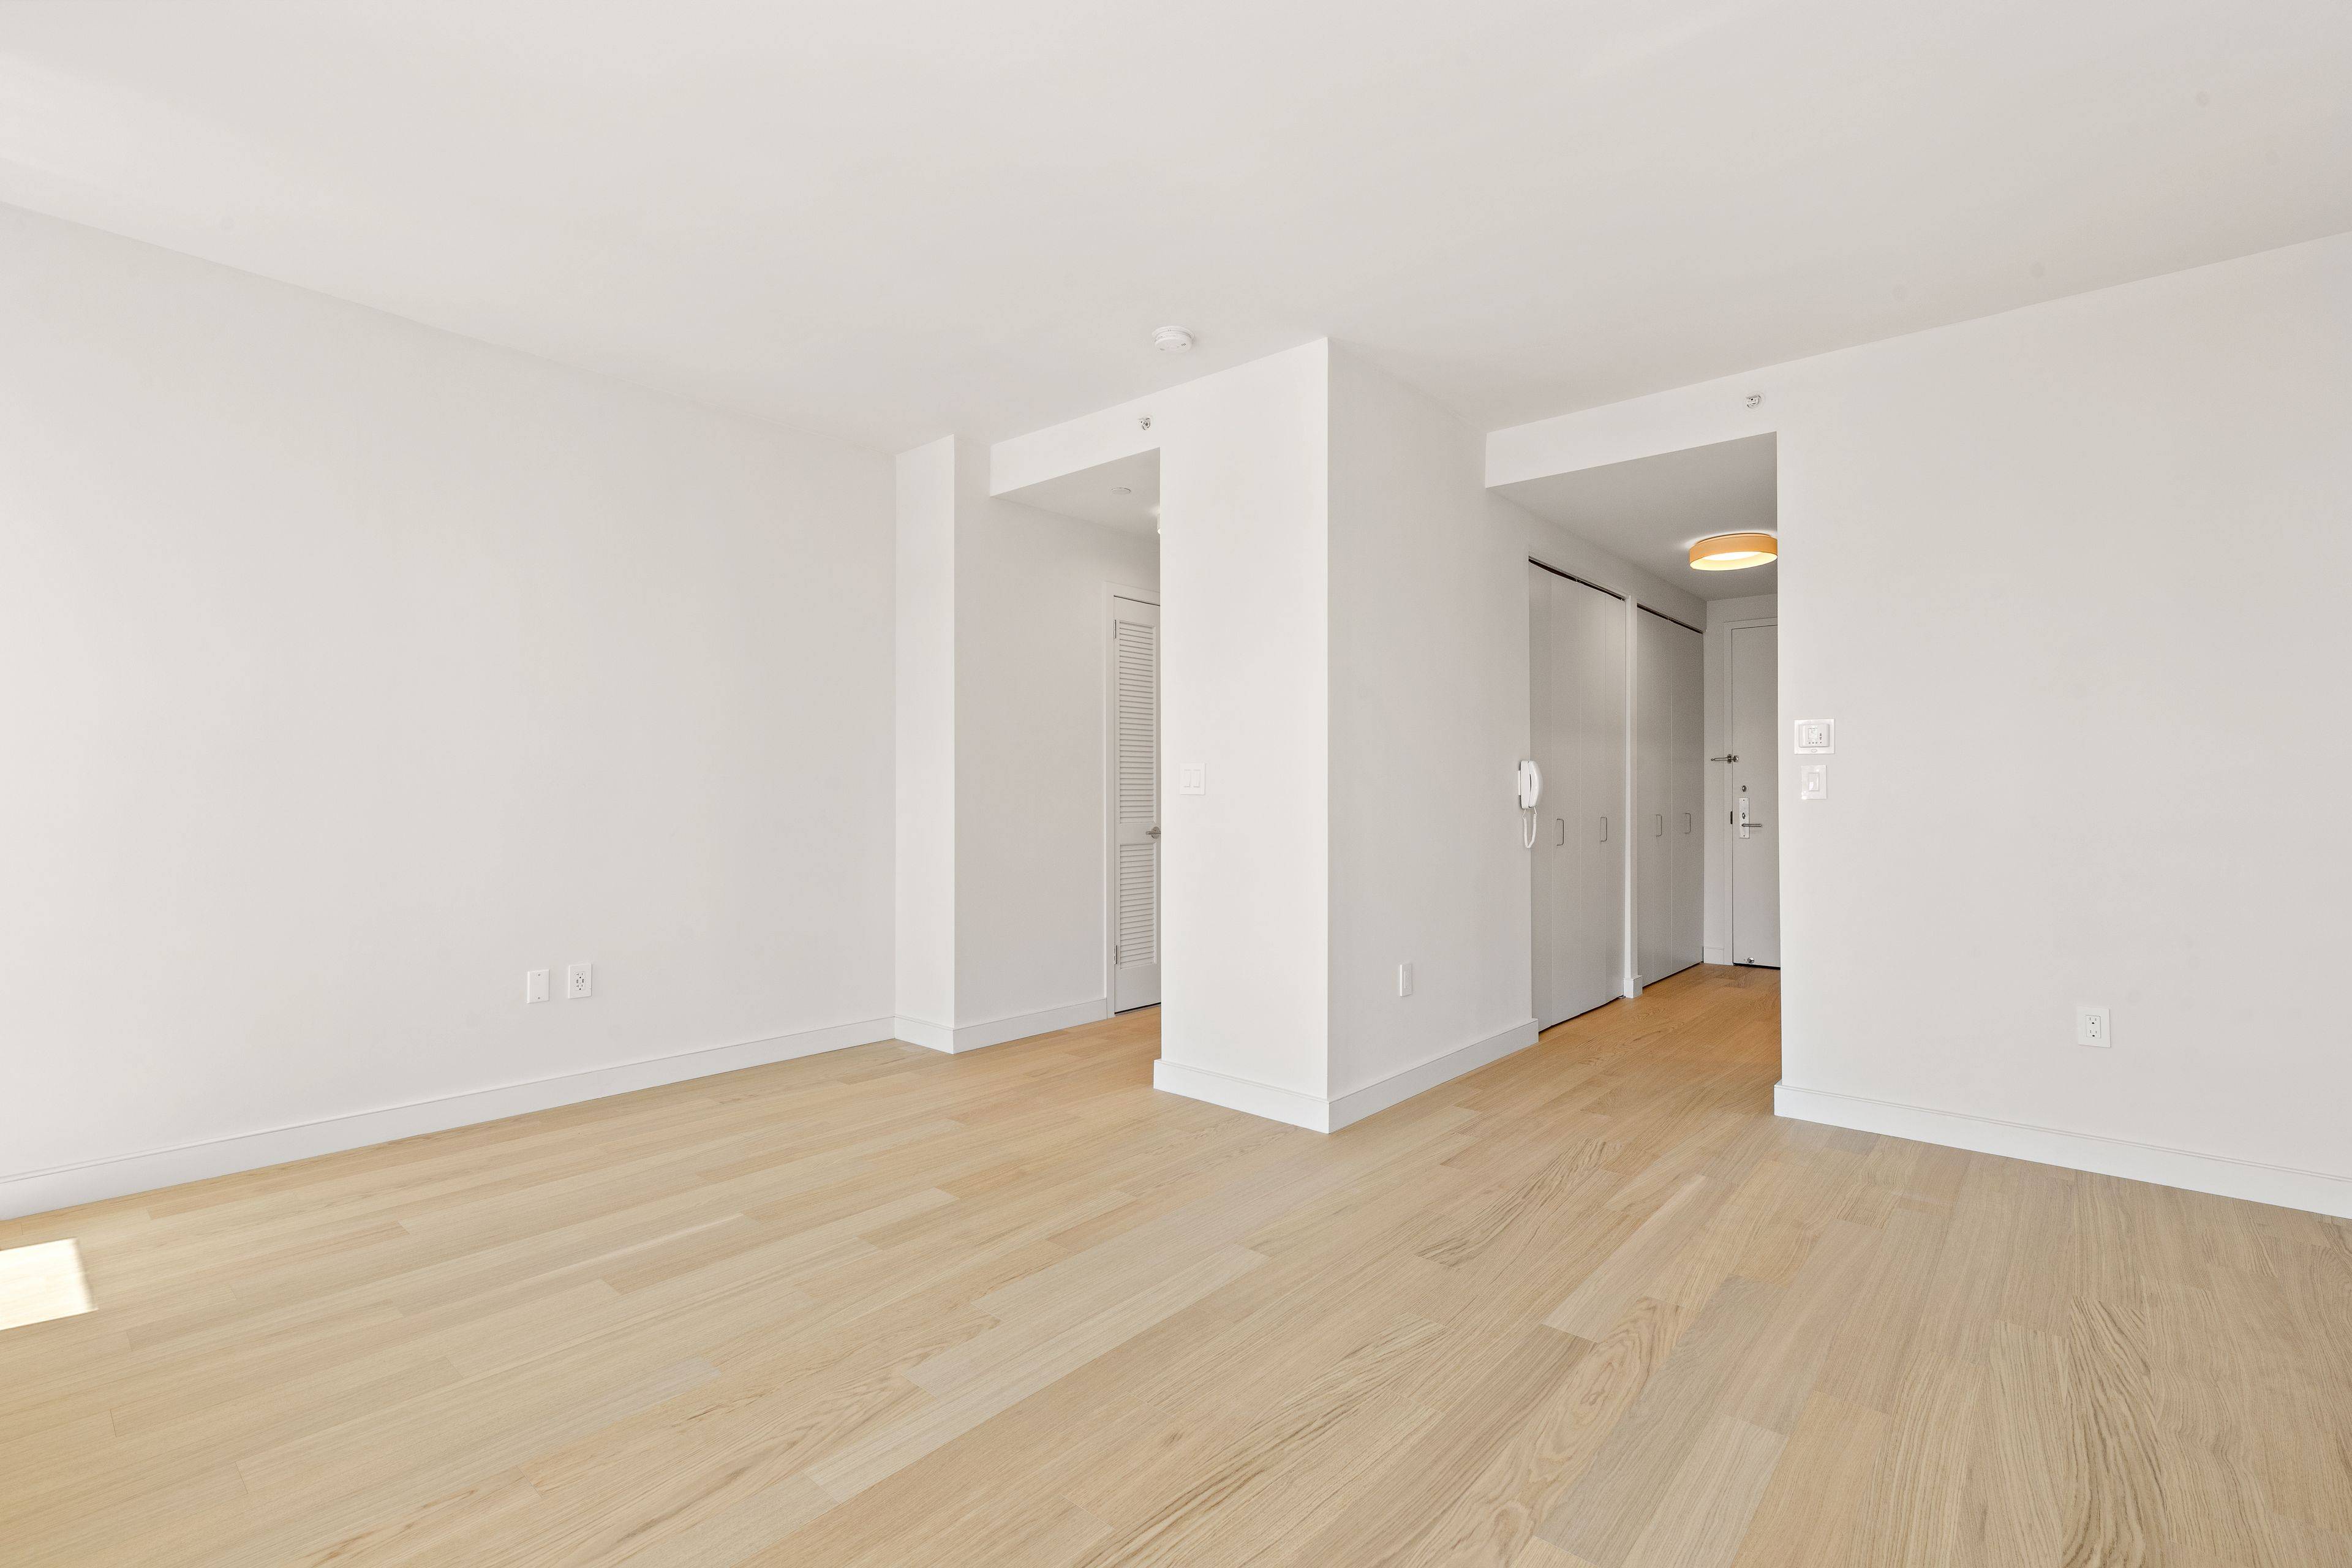 Introducing newly renovated apartment homes featuring top of the line appliances, countertops, and hardwood flooring.